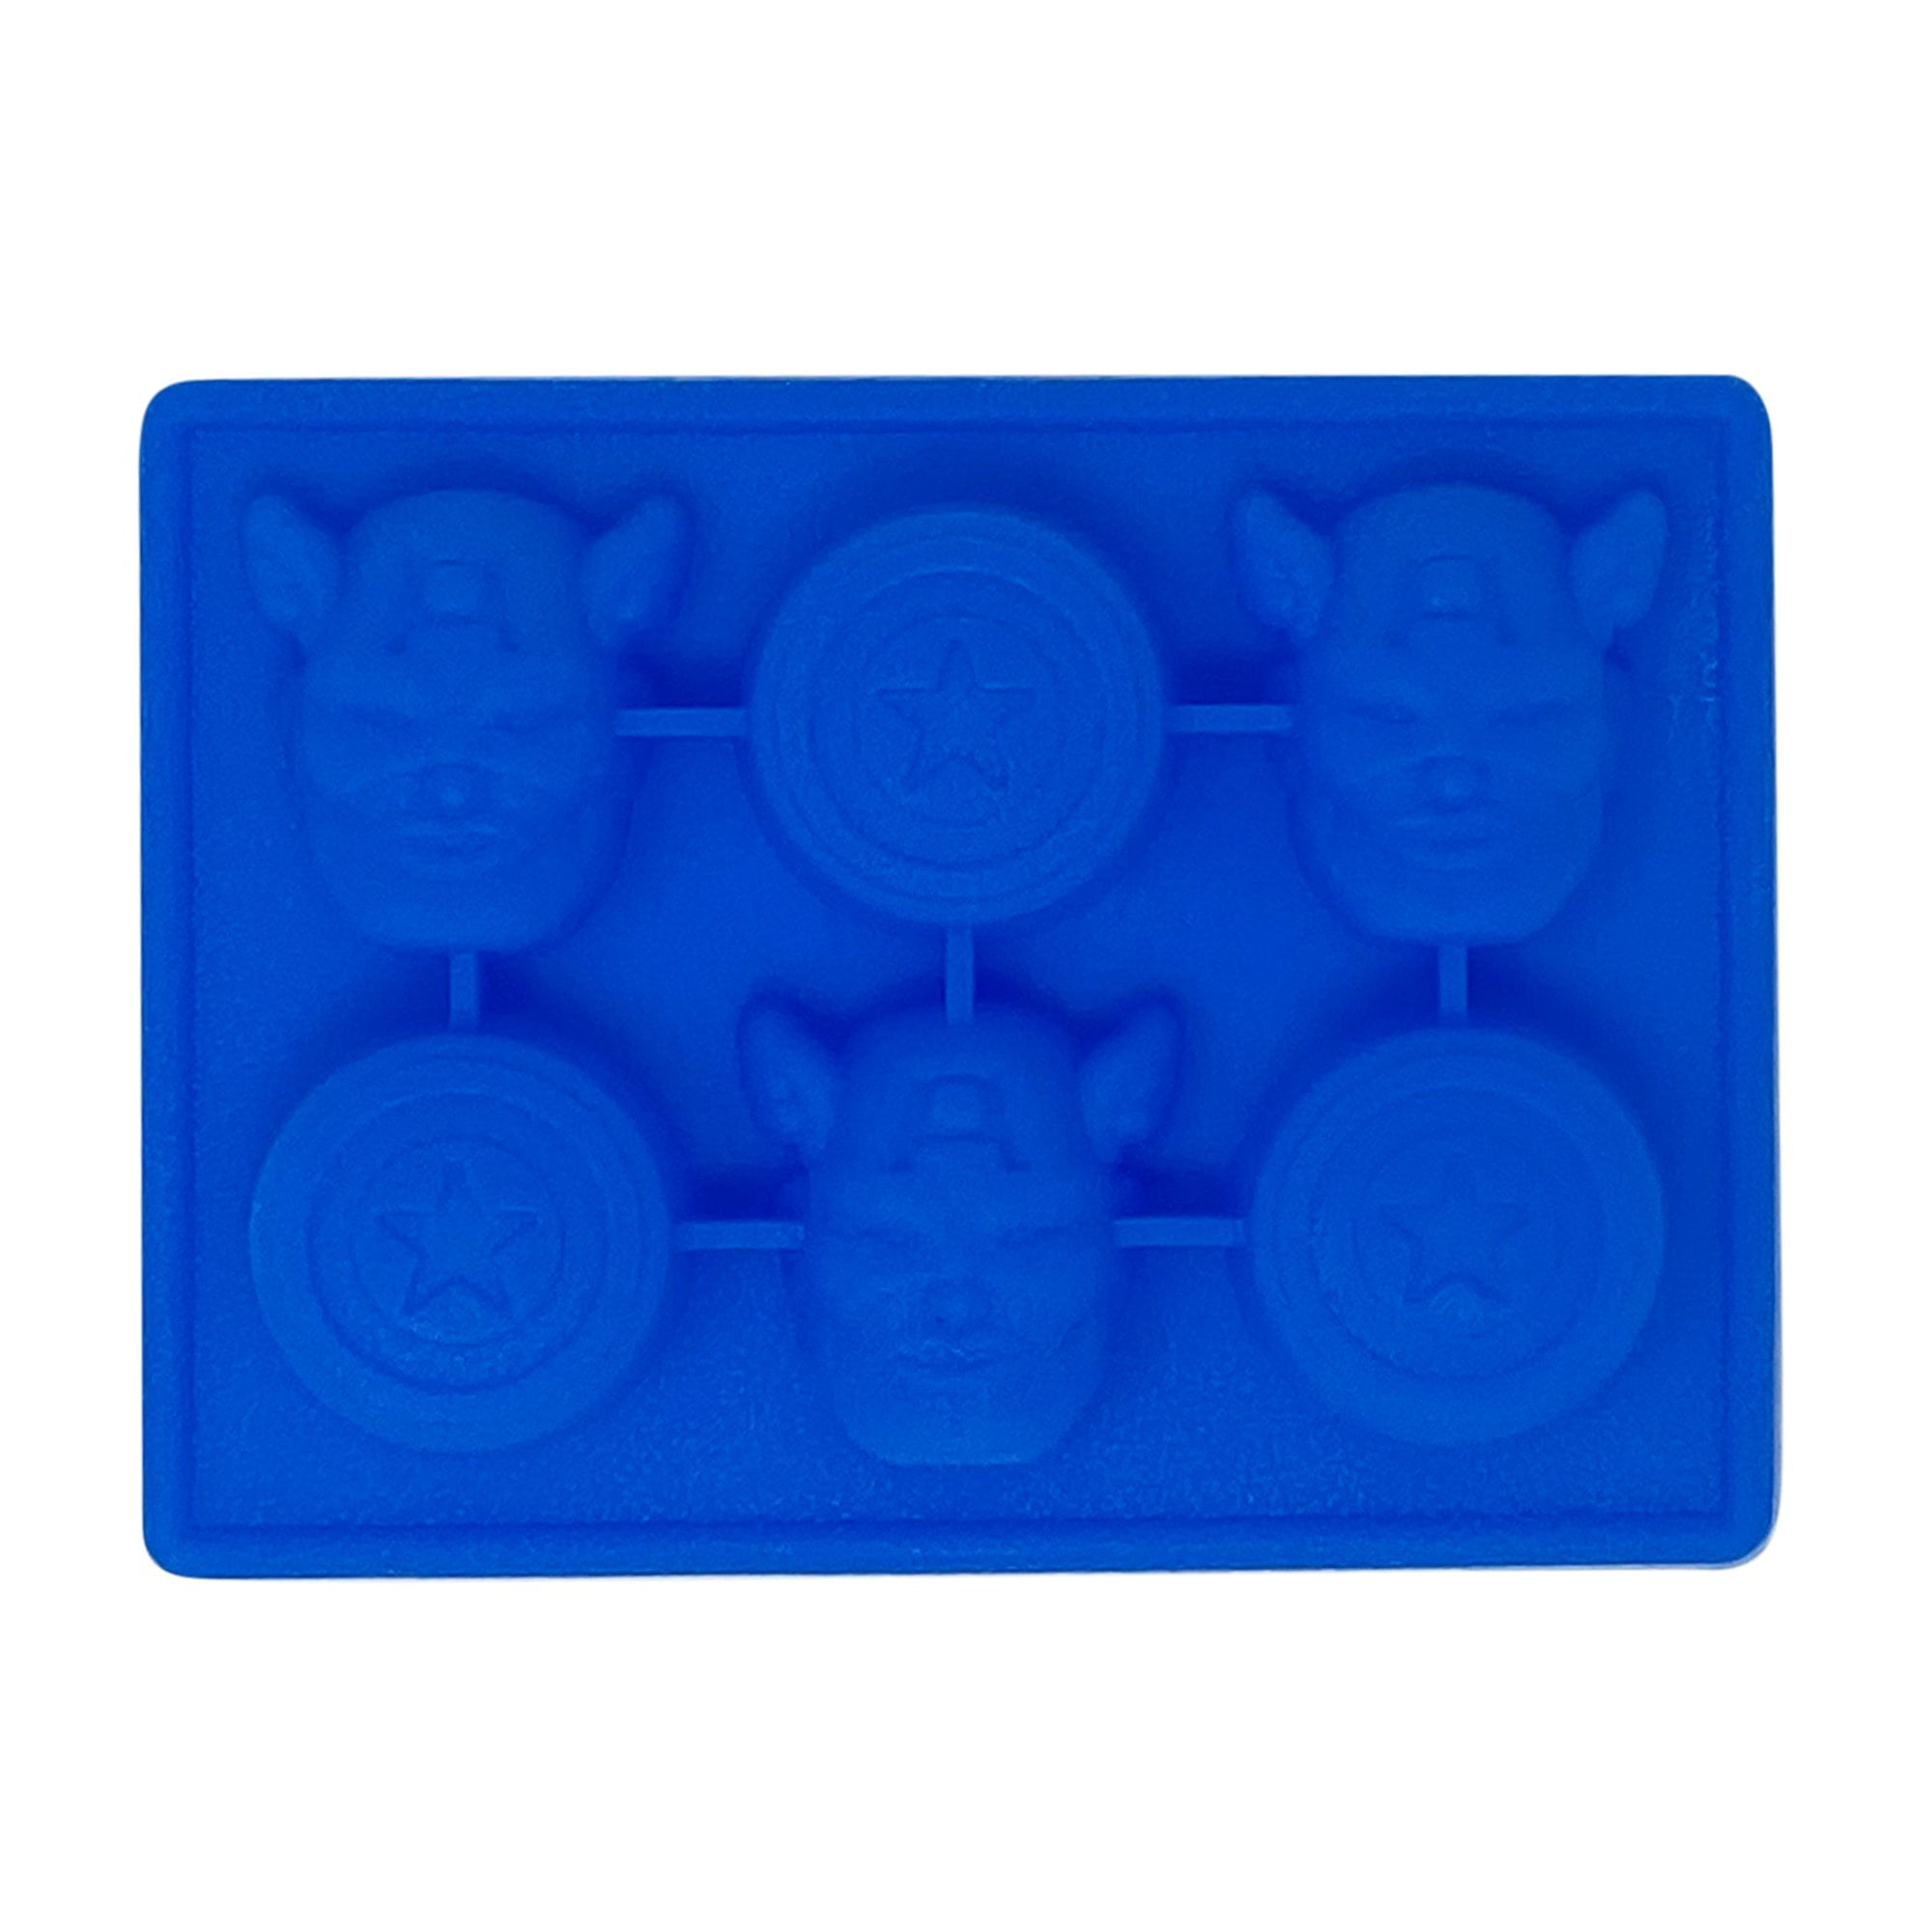 Star Wars: The Mandalorian The Child Flexible Silicone Mold Ice Cube Tray  in Character Shapes | Kitchen Gadget Essentials, Reusable Ice Mold for